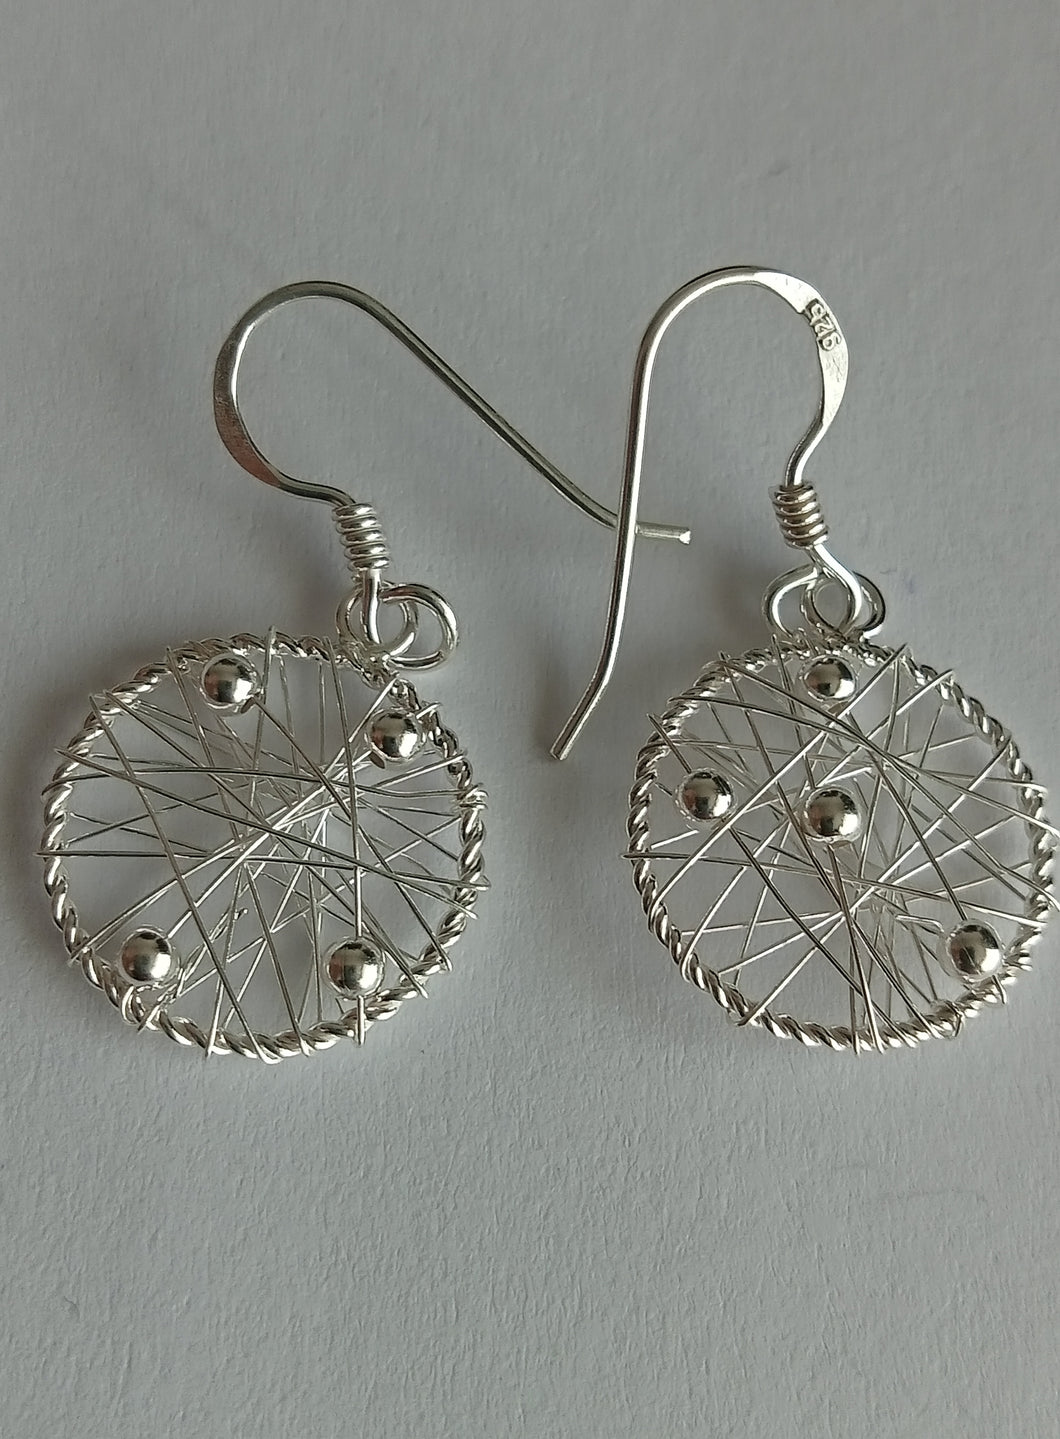 Pair of Wire Webbed Earrings decorated with Silver Balls